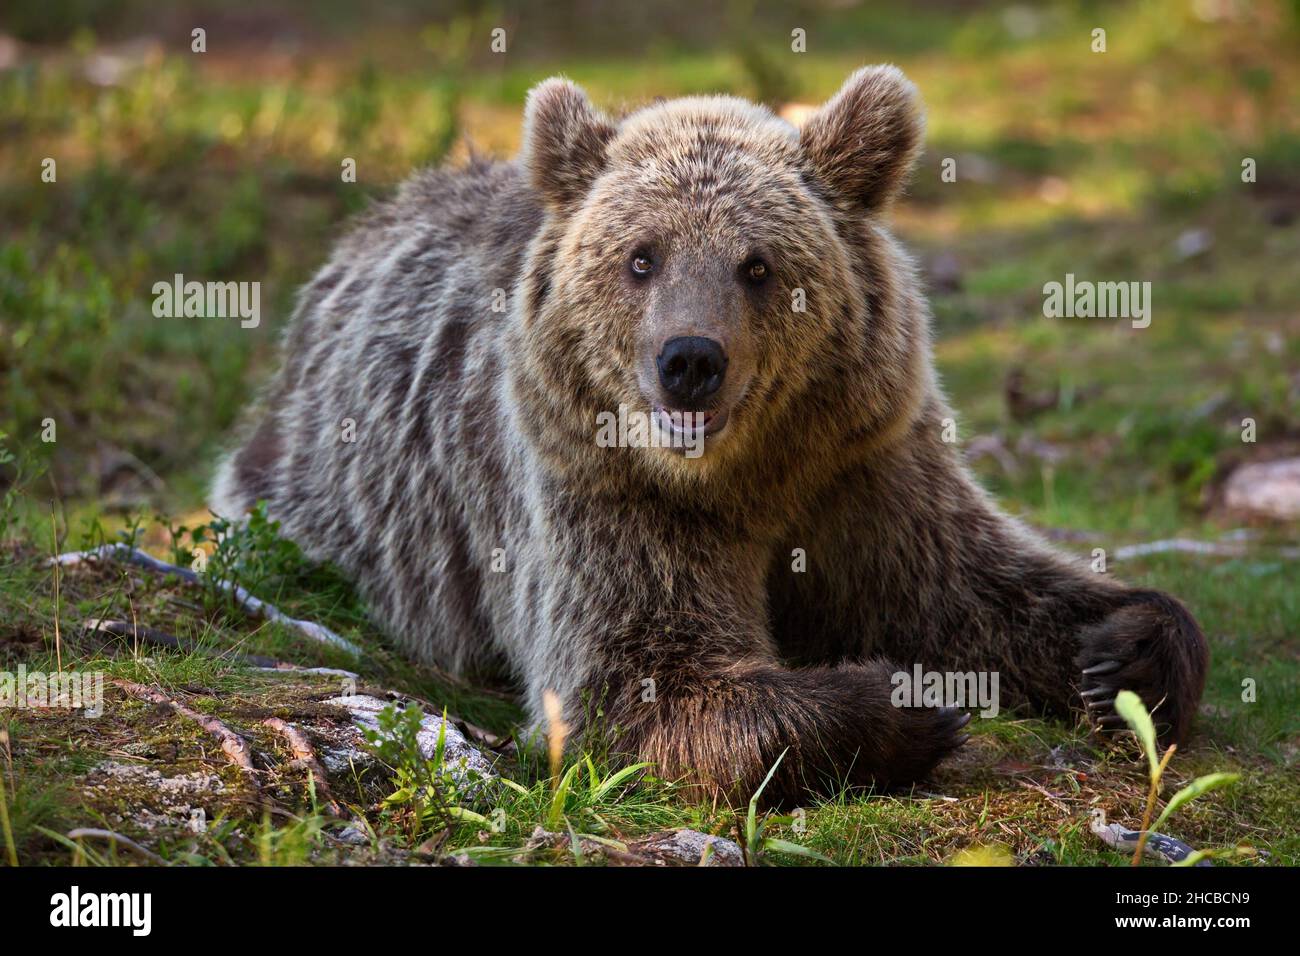 Big brown bear in the forest in Finland Stock Photo